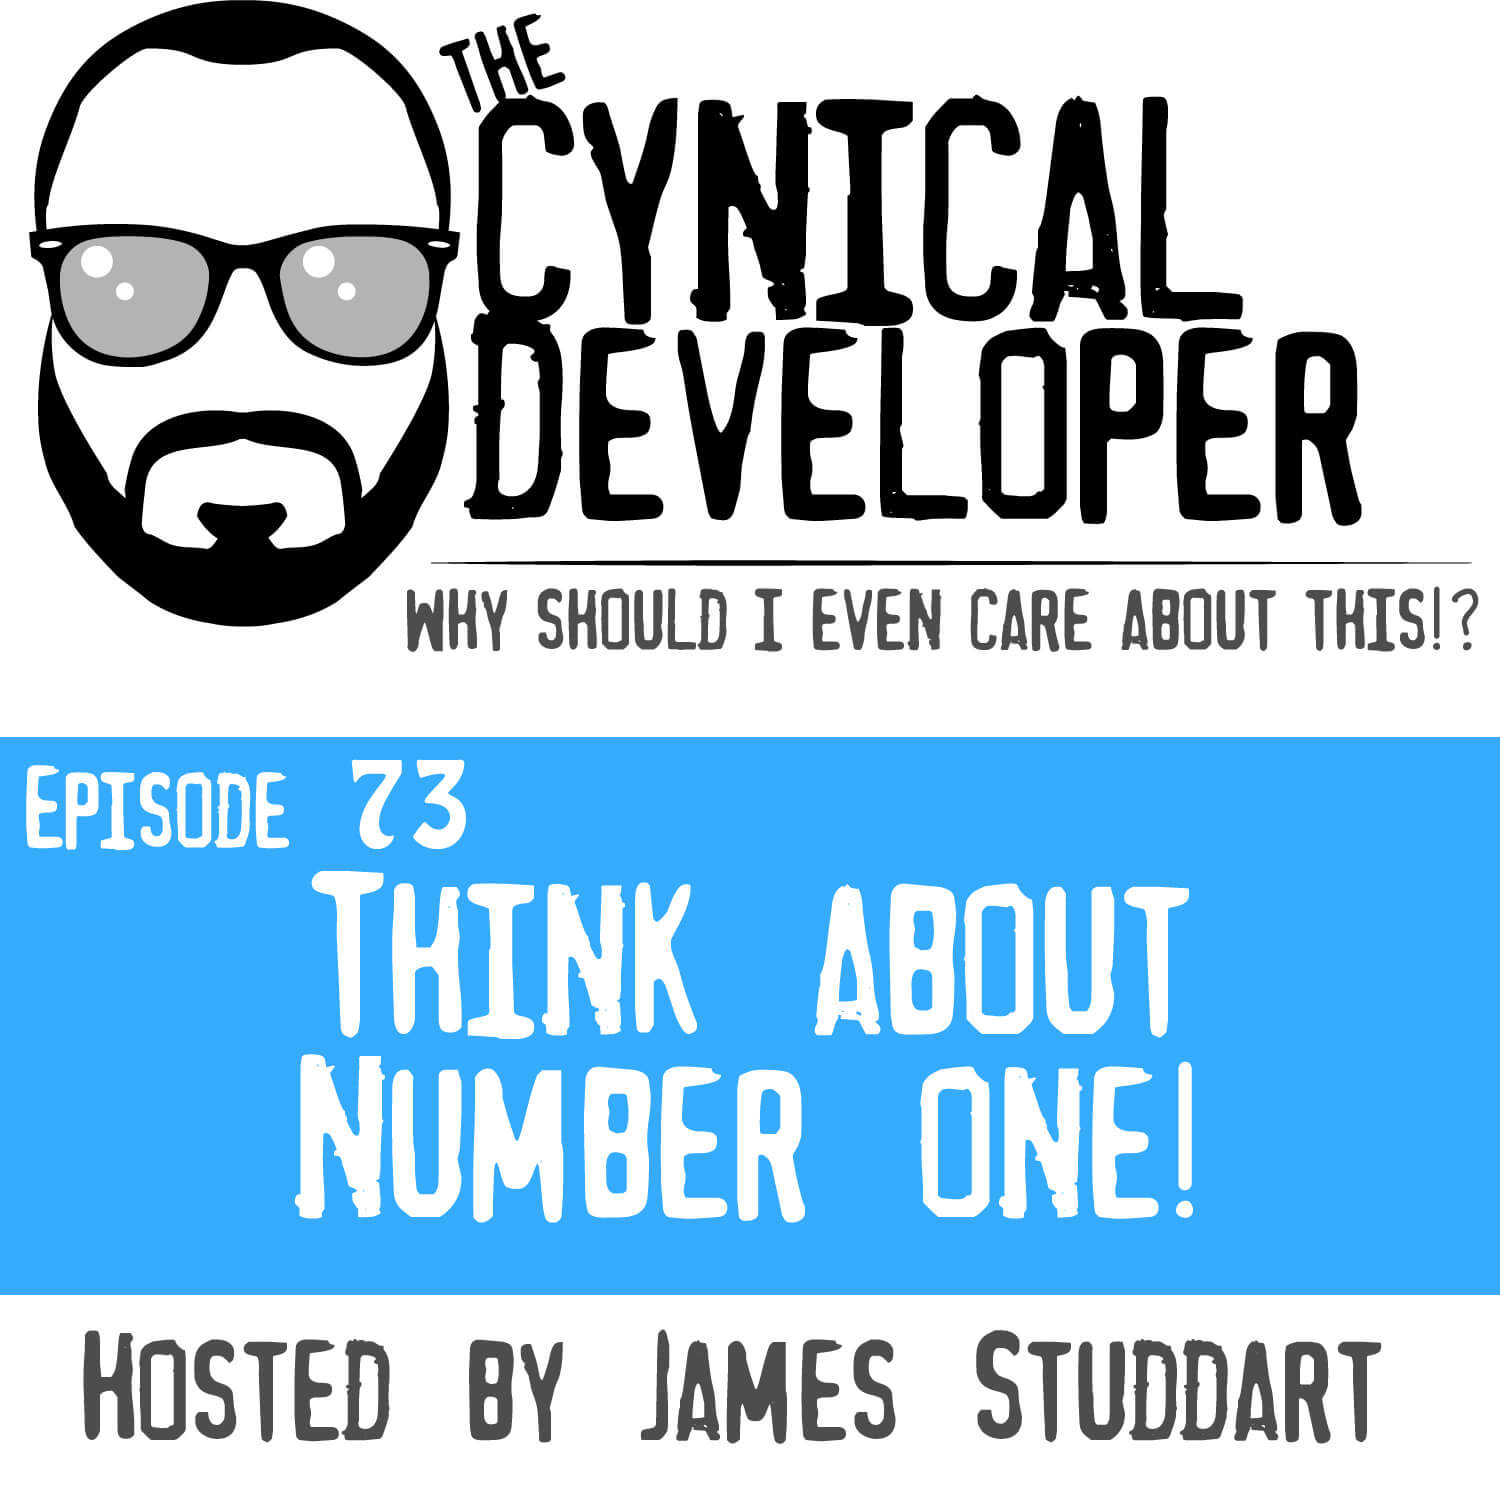 Episode 73 - Think about number one!